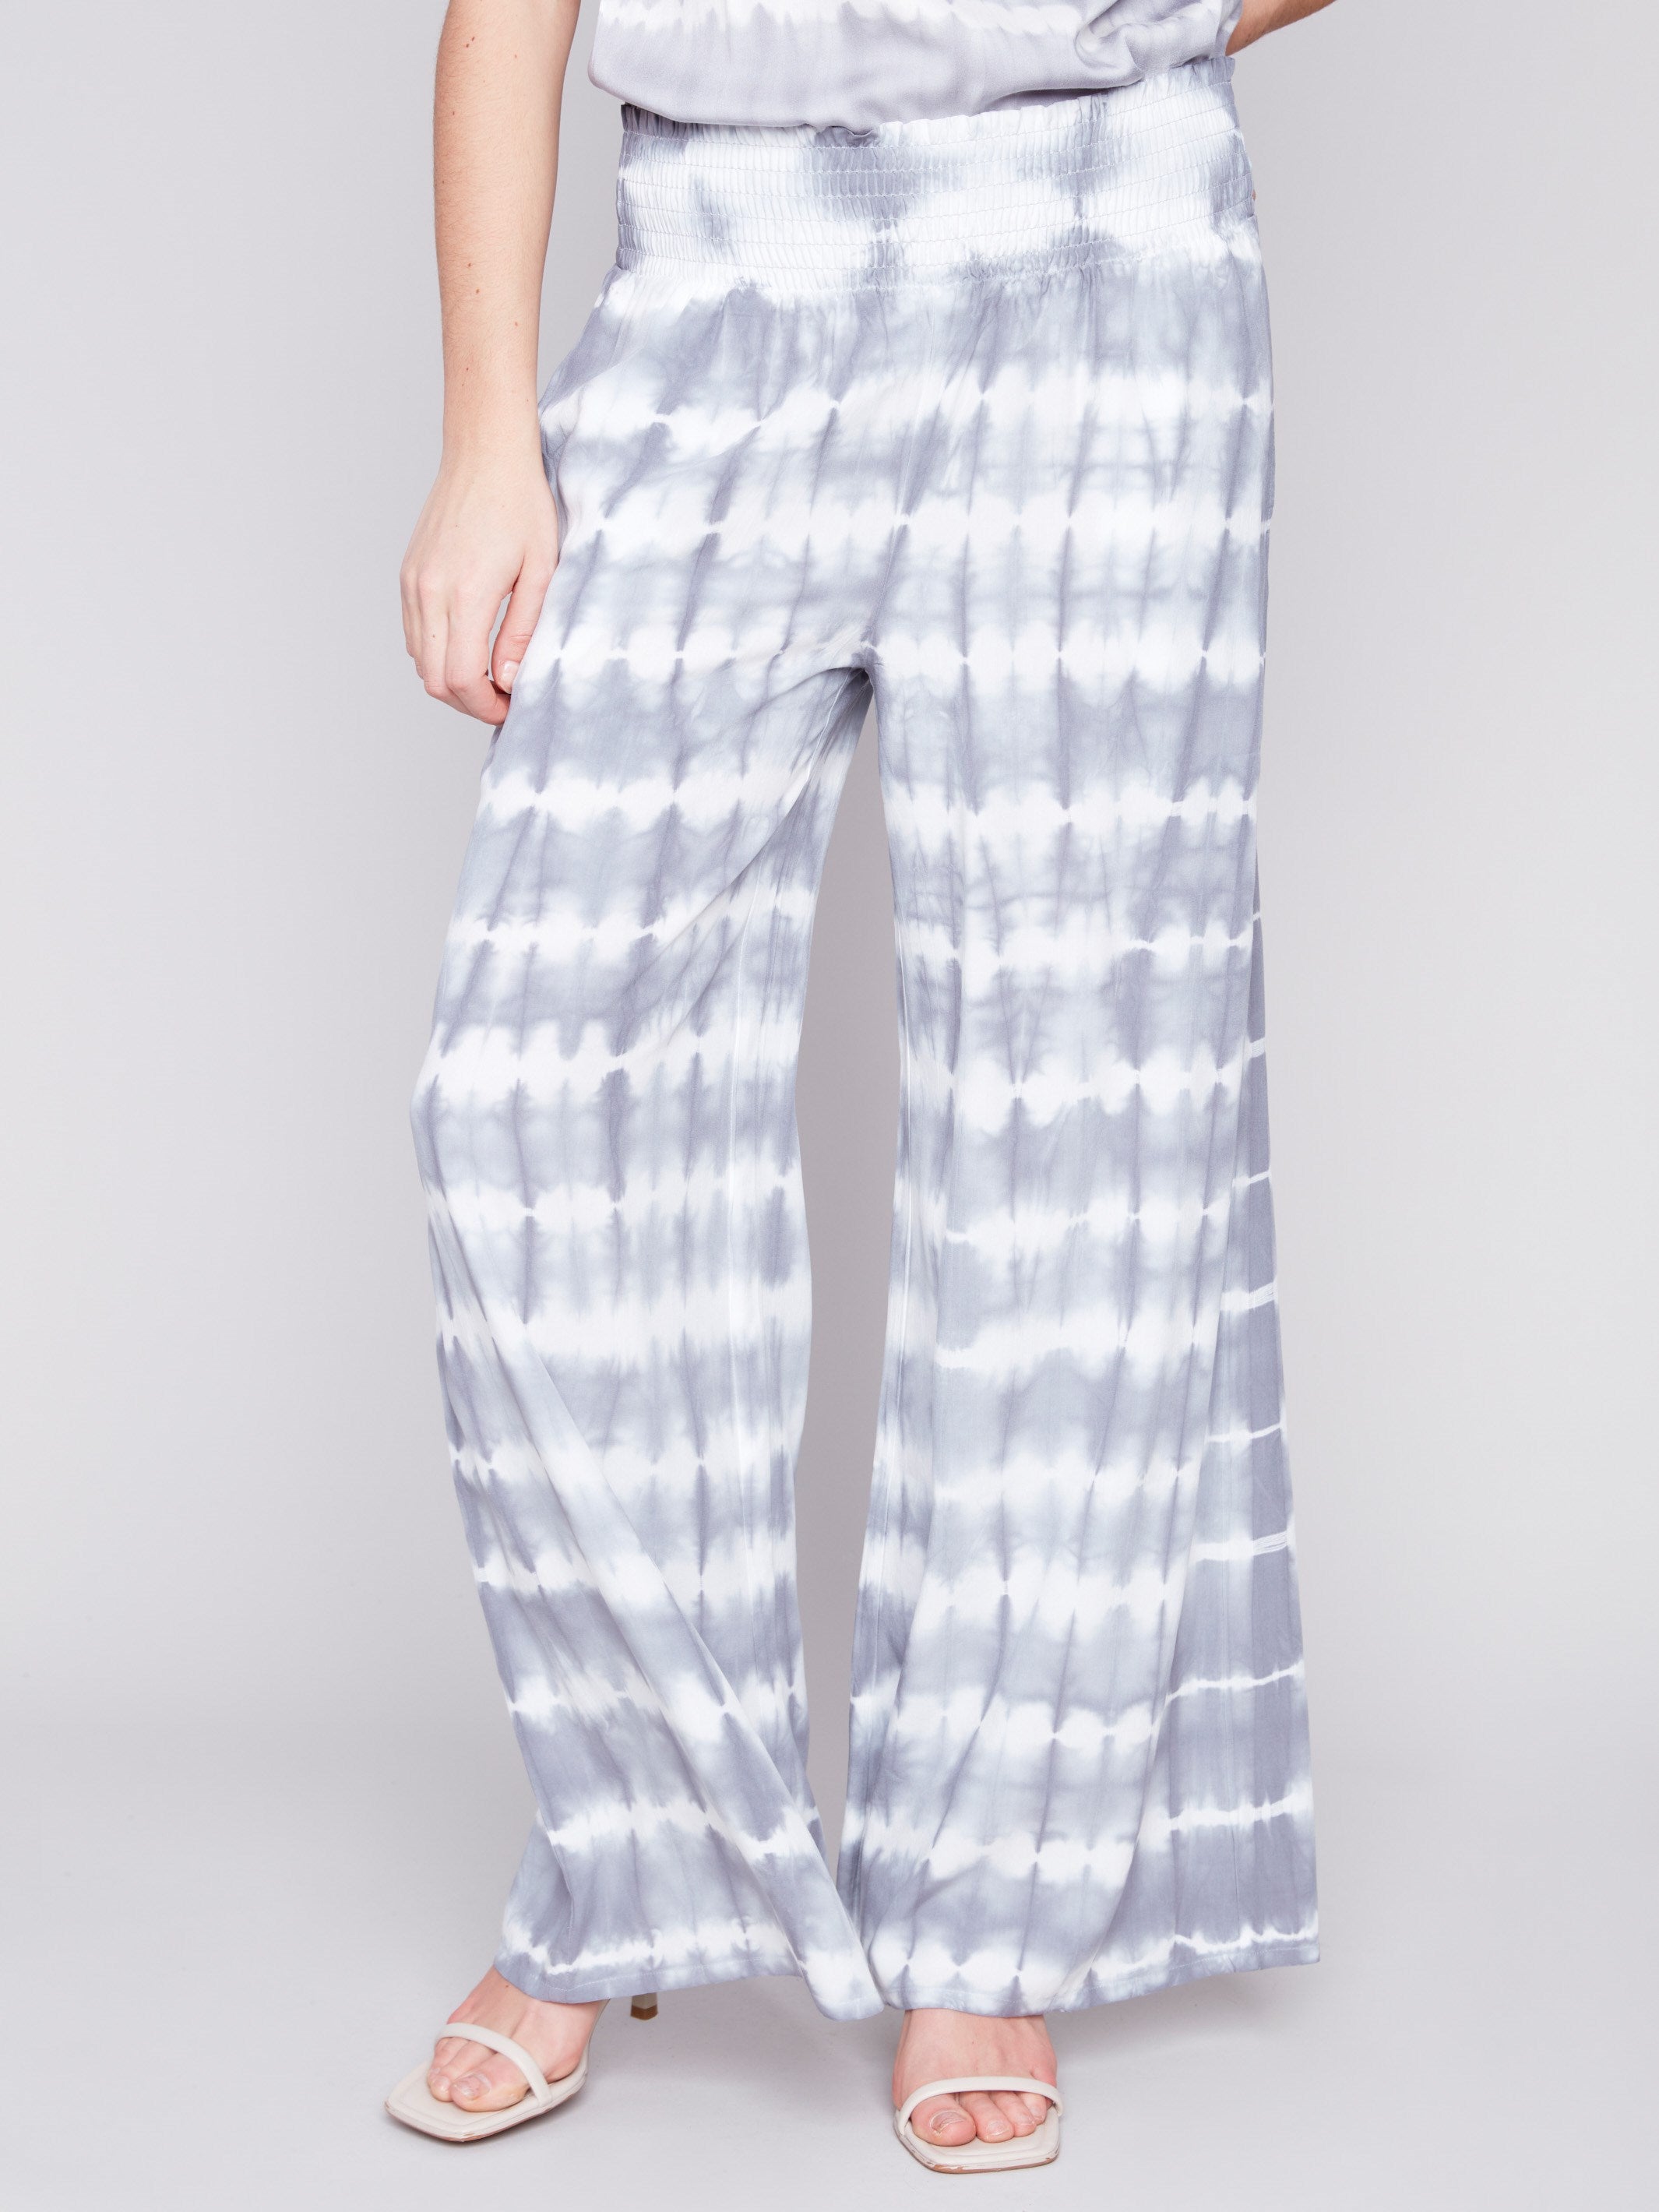 Printed Flowy Palazzo Pants - Ceramic - Charlie B Collection Canada - Image 3